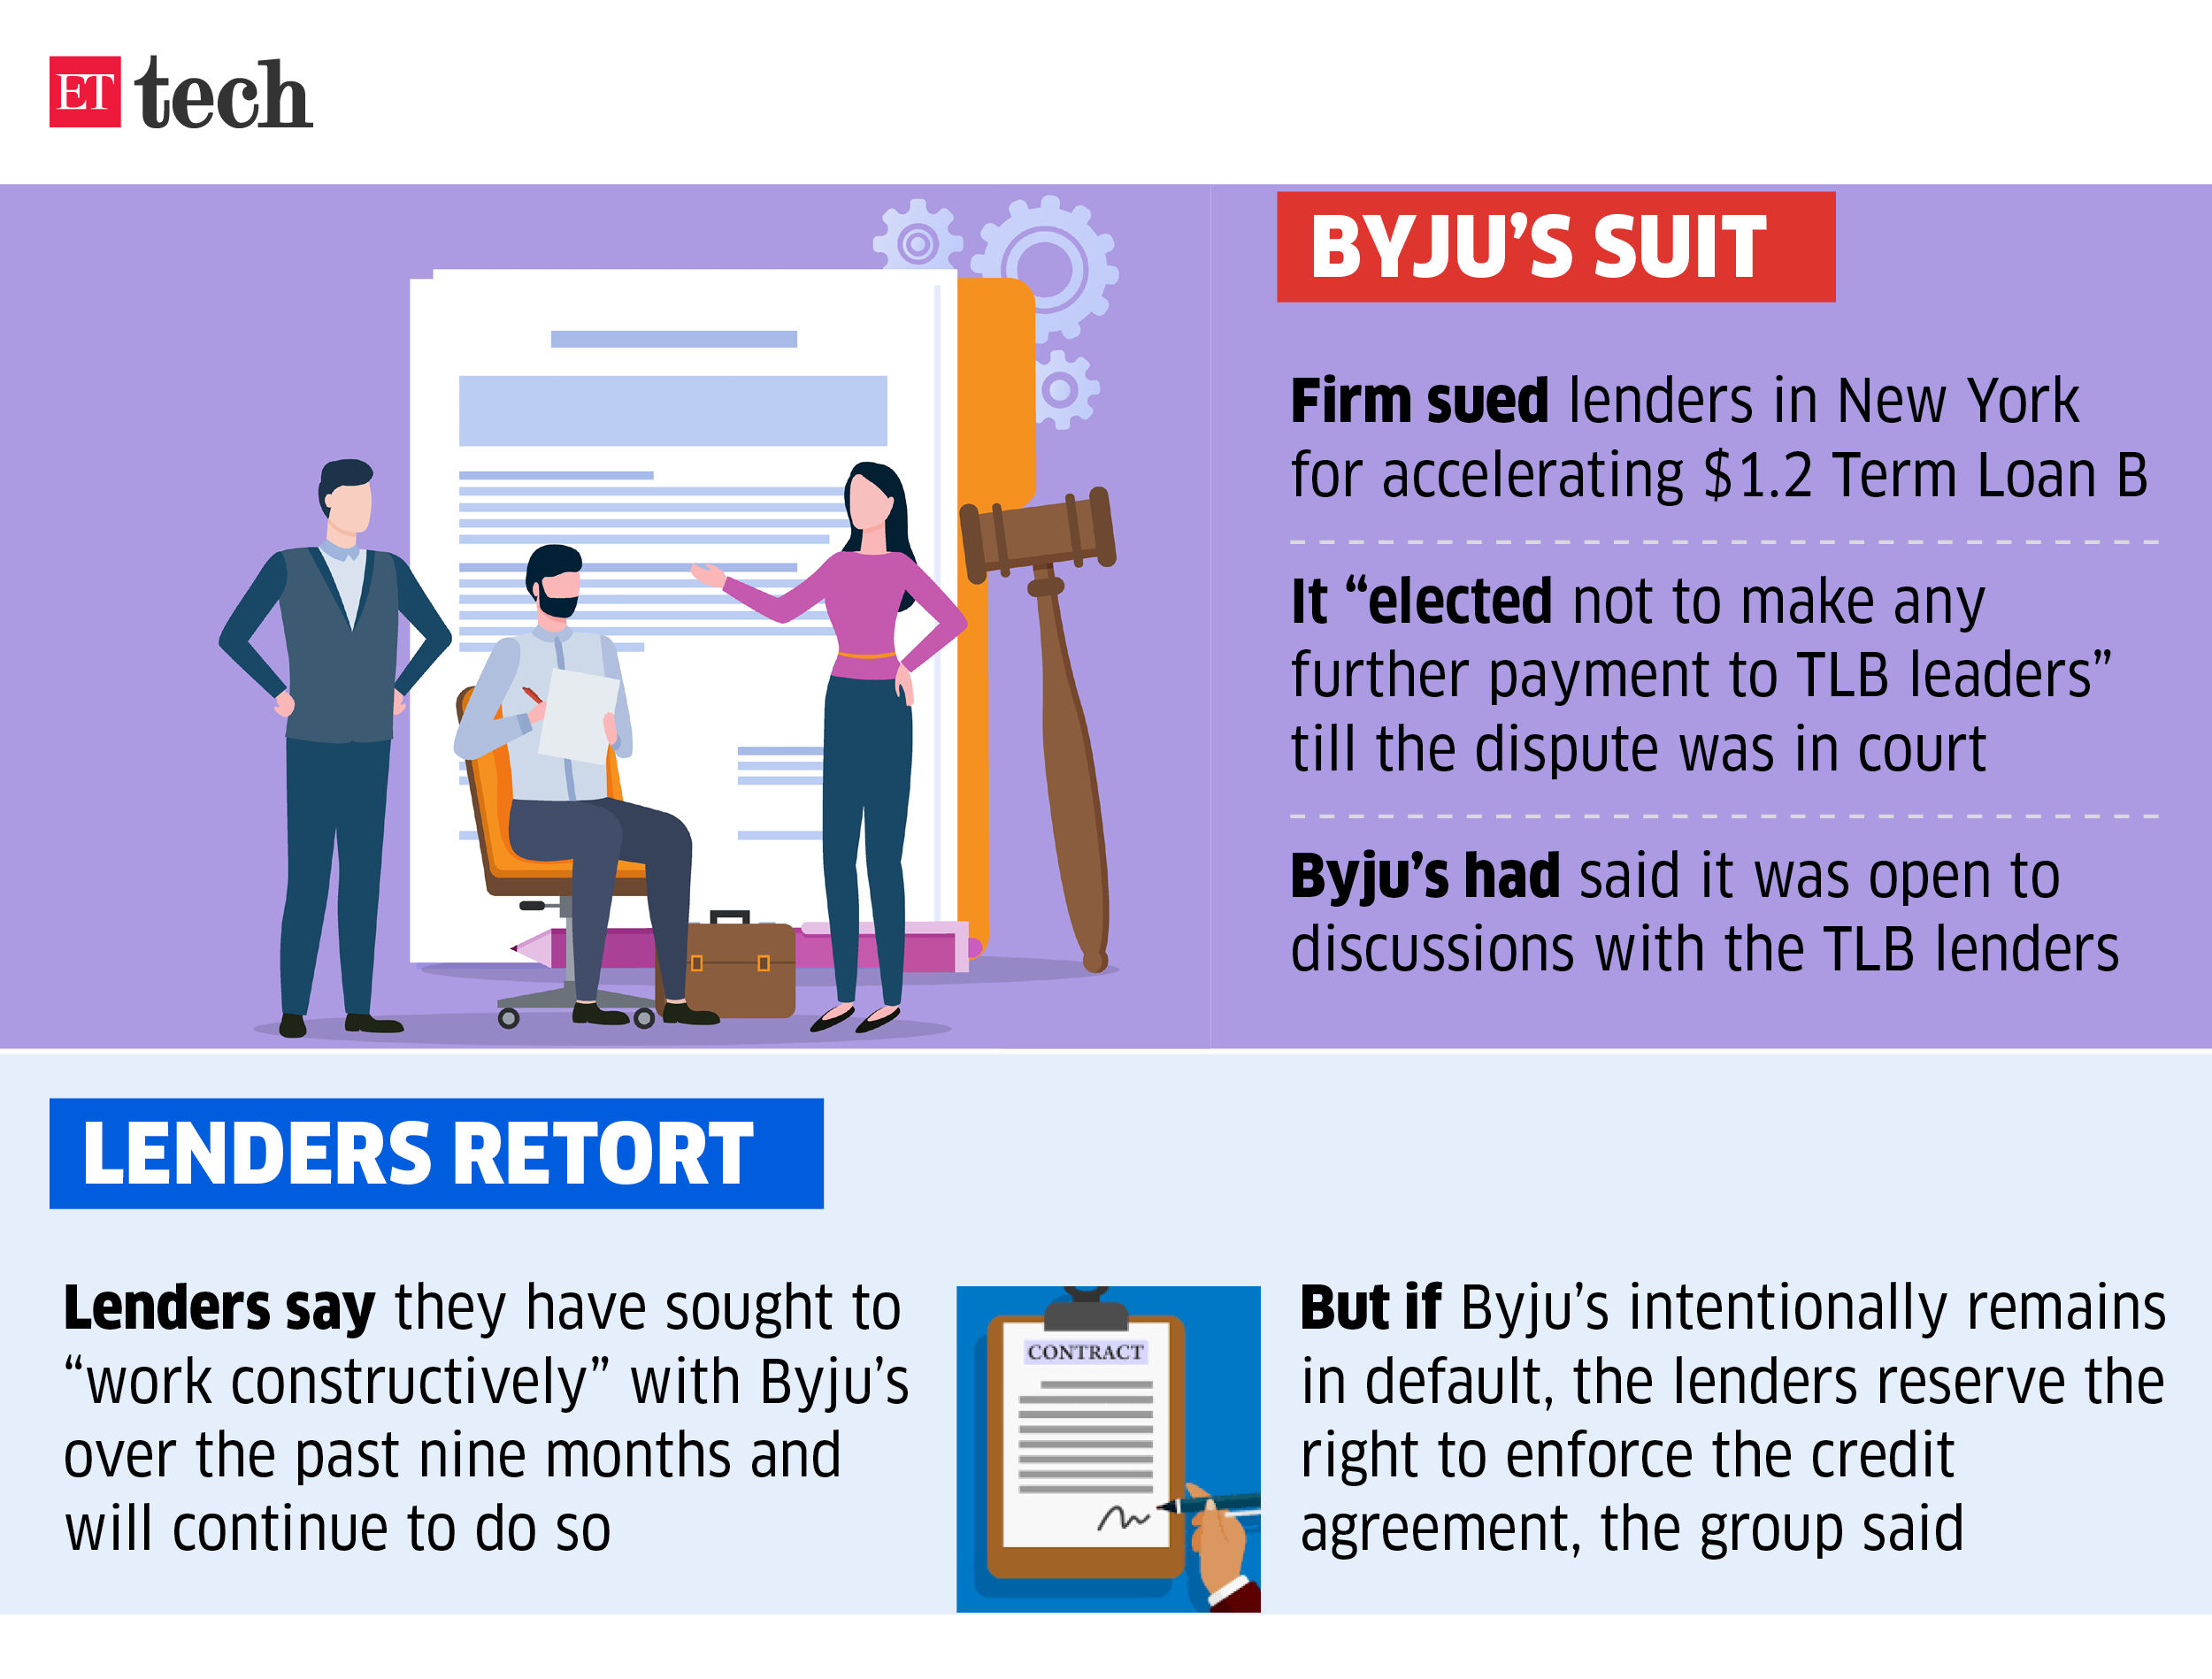 Byjus suit_Graphic_ETTECH